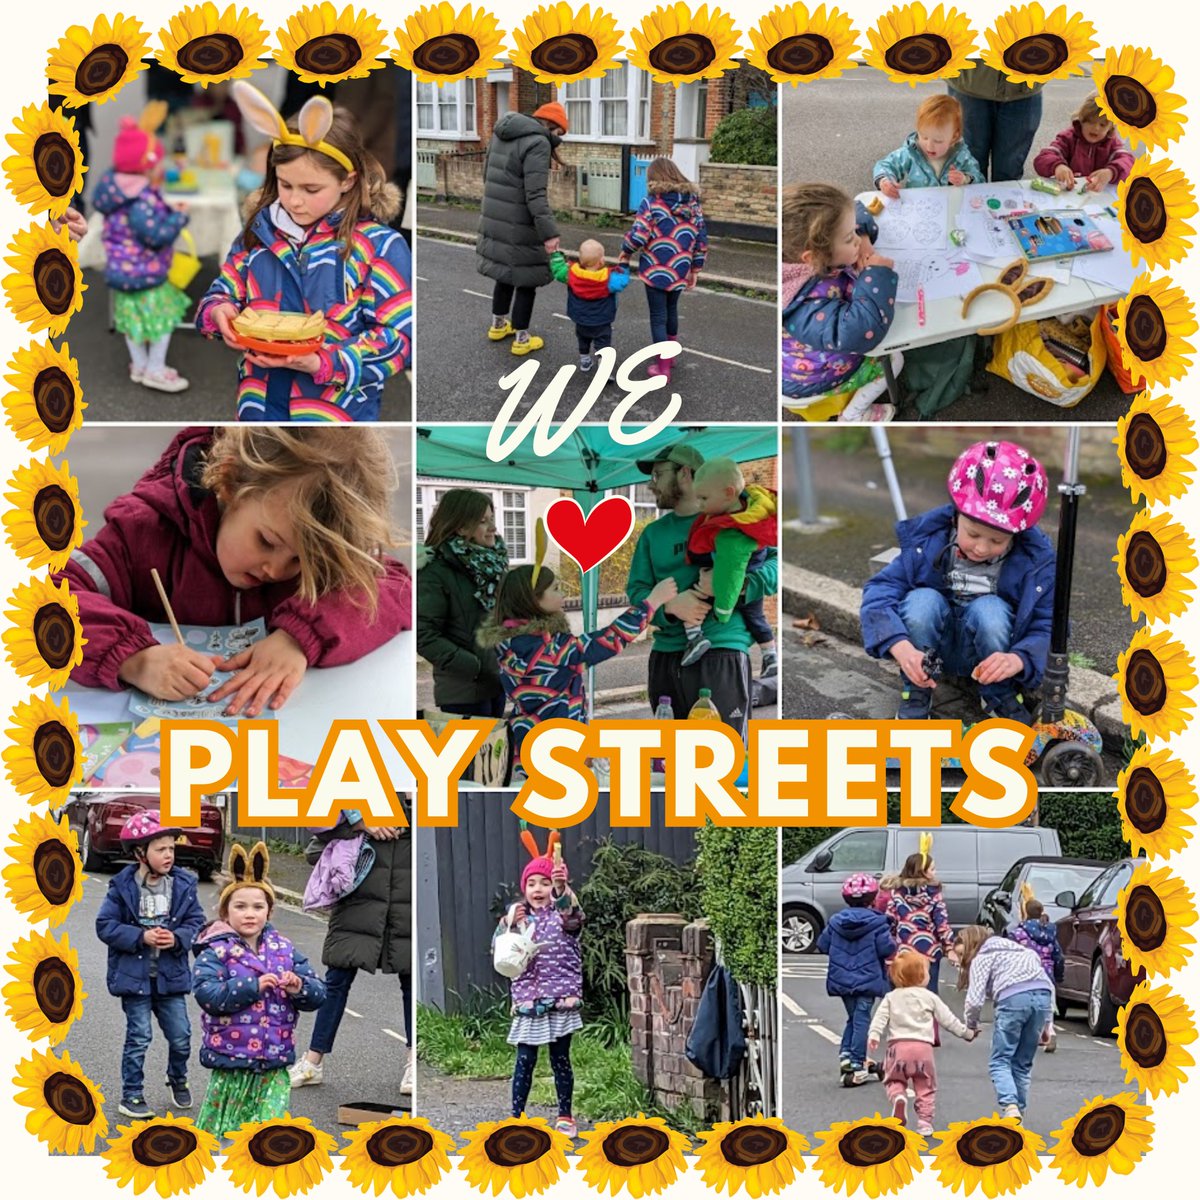 Another fab Play Street event, with around 30 local residents of all ages dodging the drizzle to have a most eggscellent time! Already looking forward to the community coming out to play again in May & June. #Norbiton #PlayingOut #SpaceForPlay #Easter #PlayStreets #Community